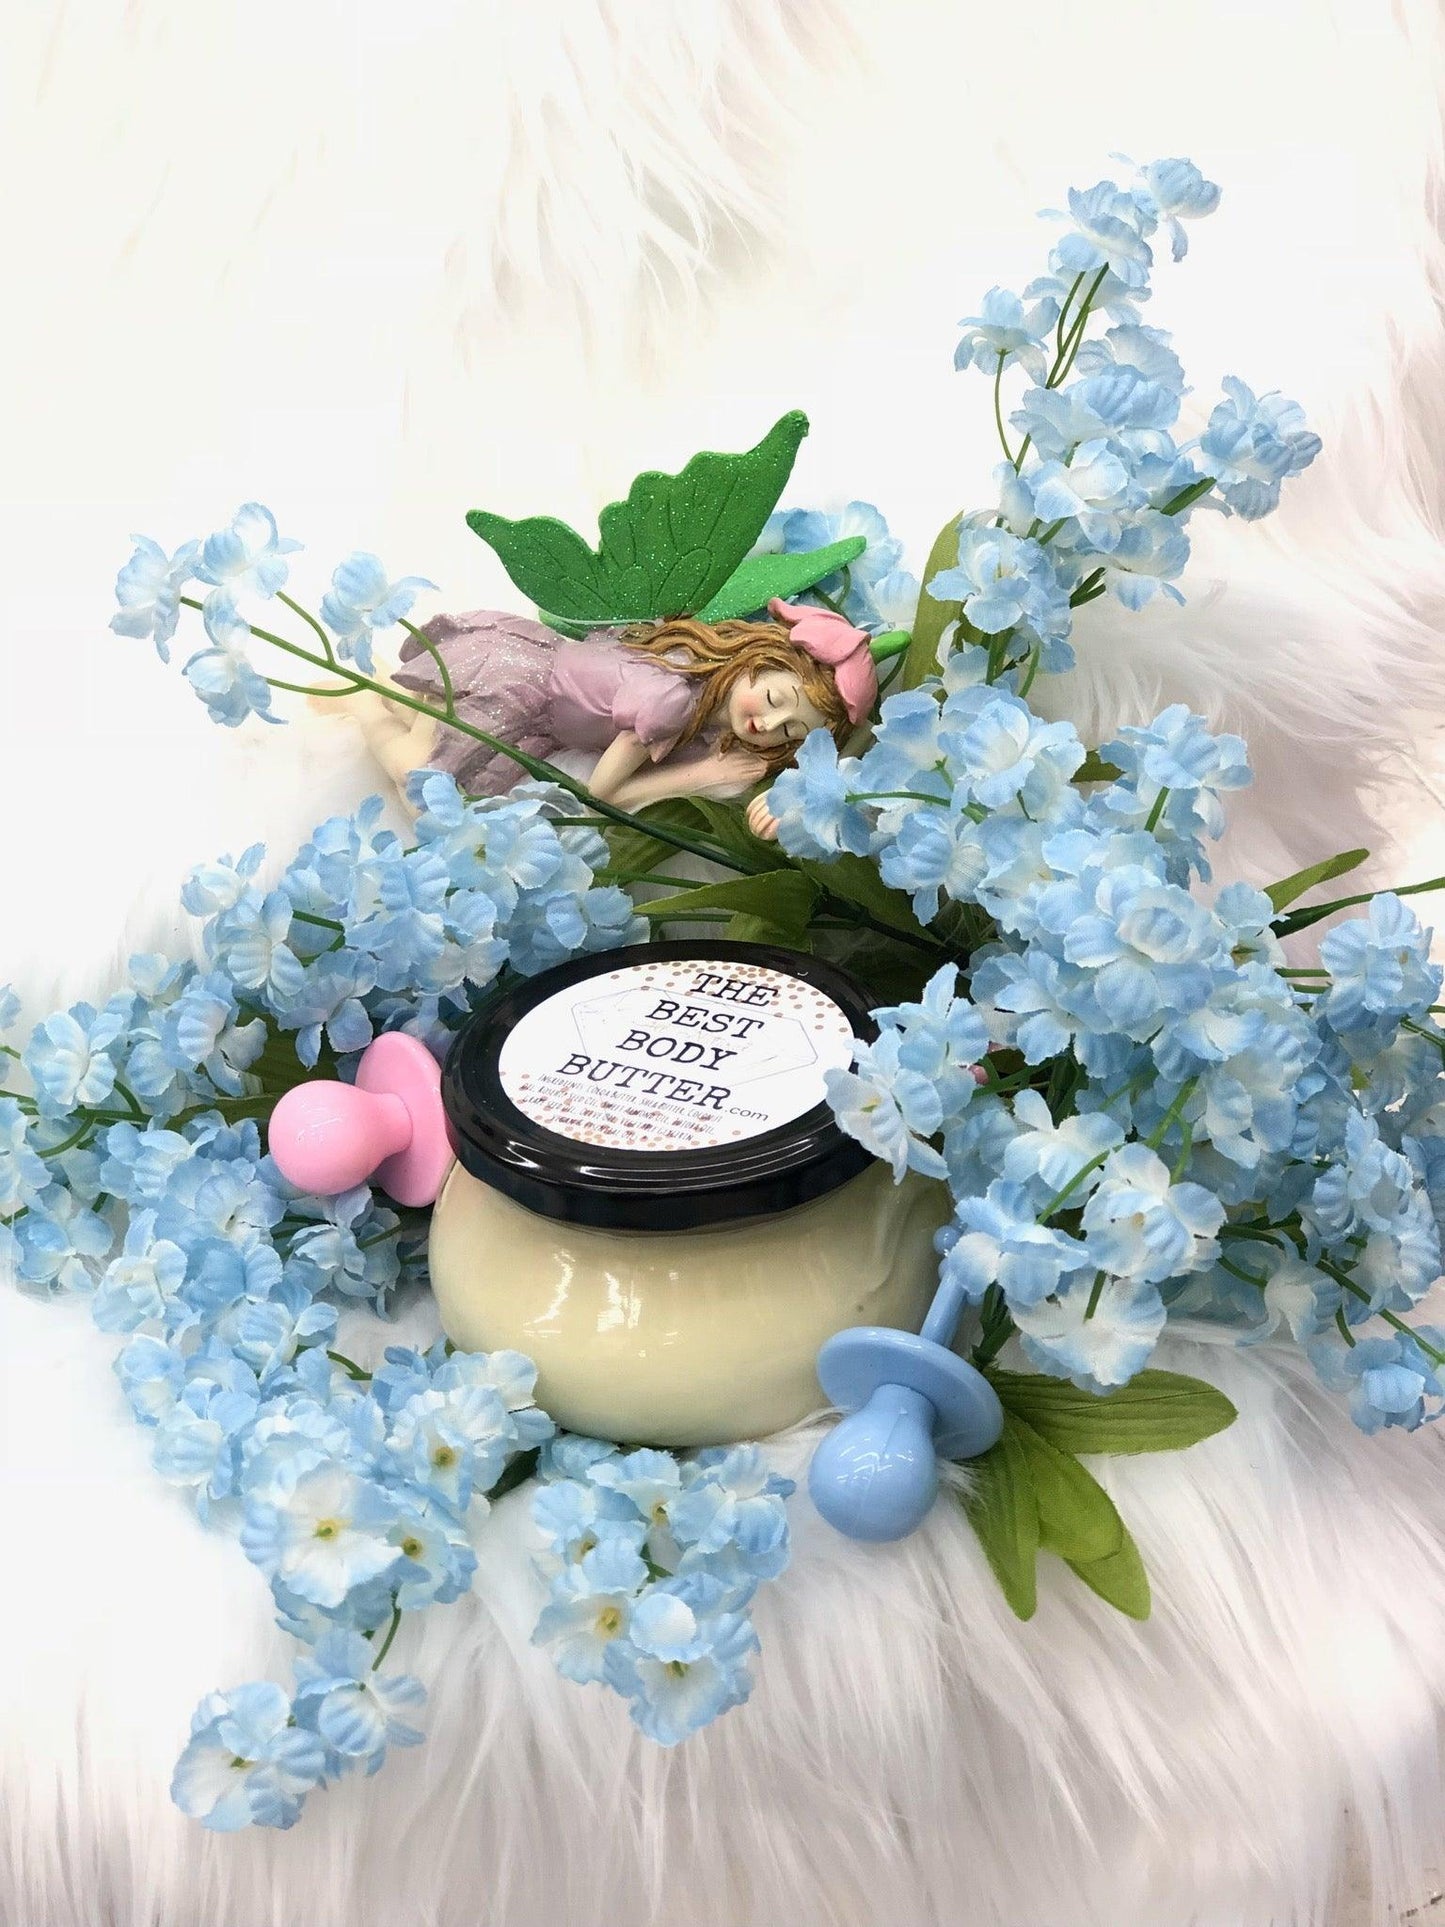 Baby Love Mini - The Best Body Butter